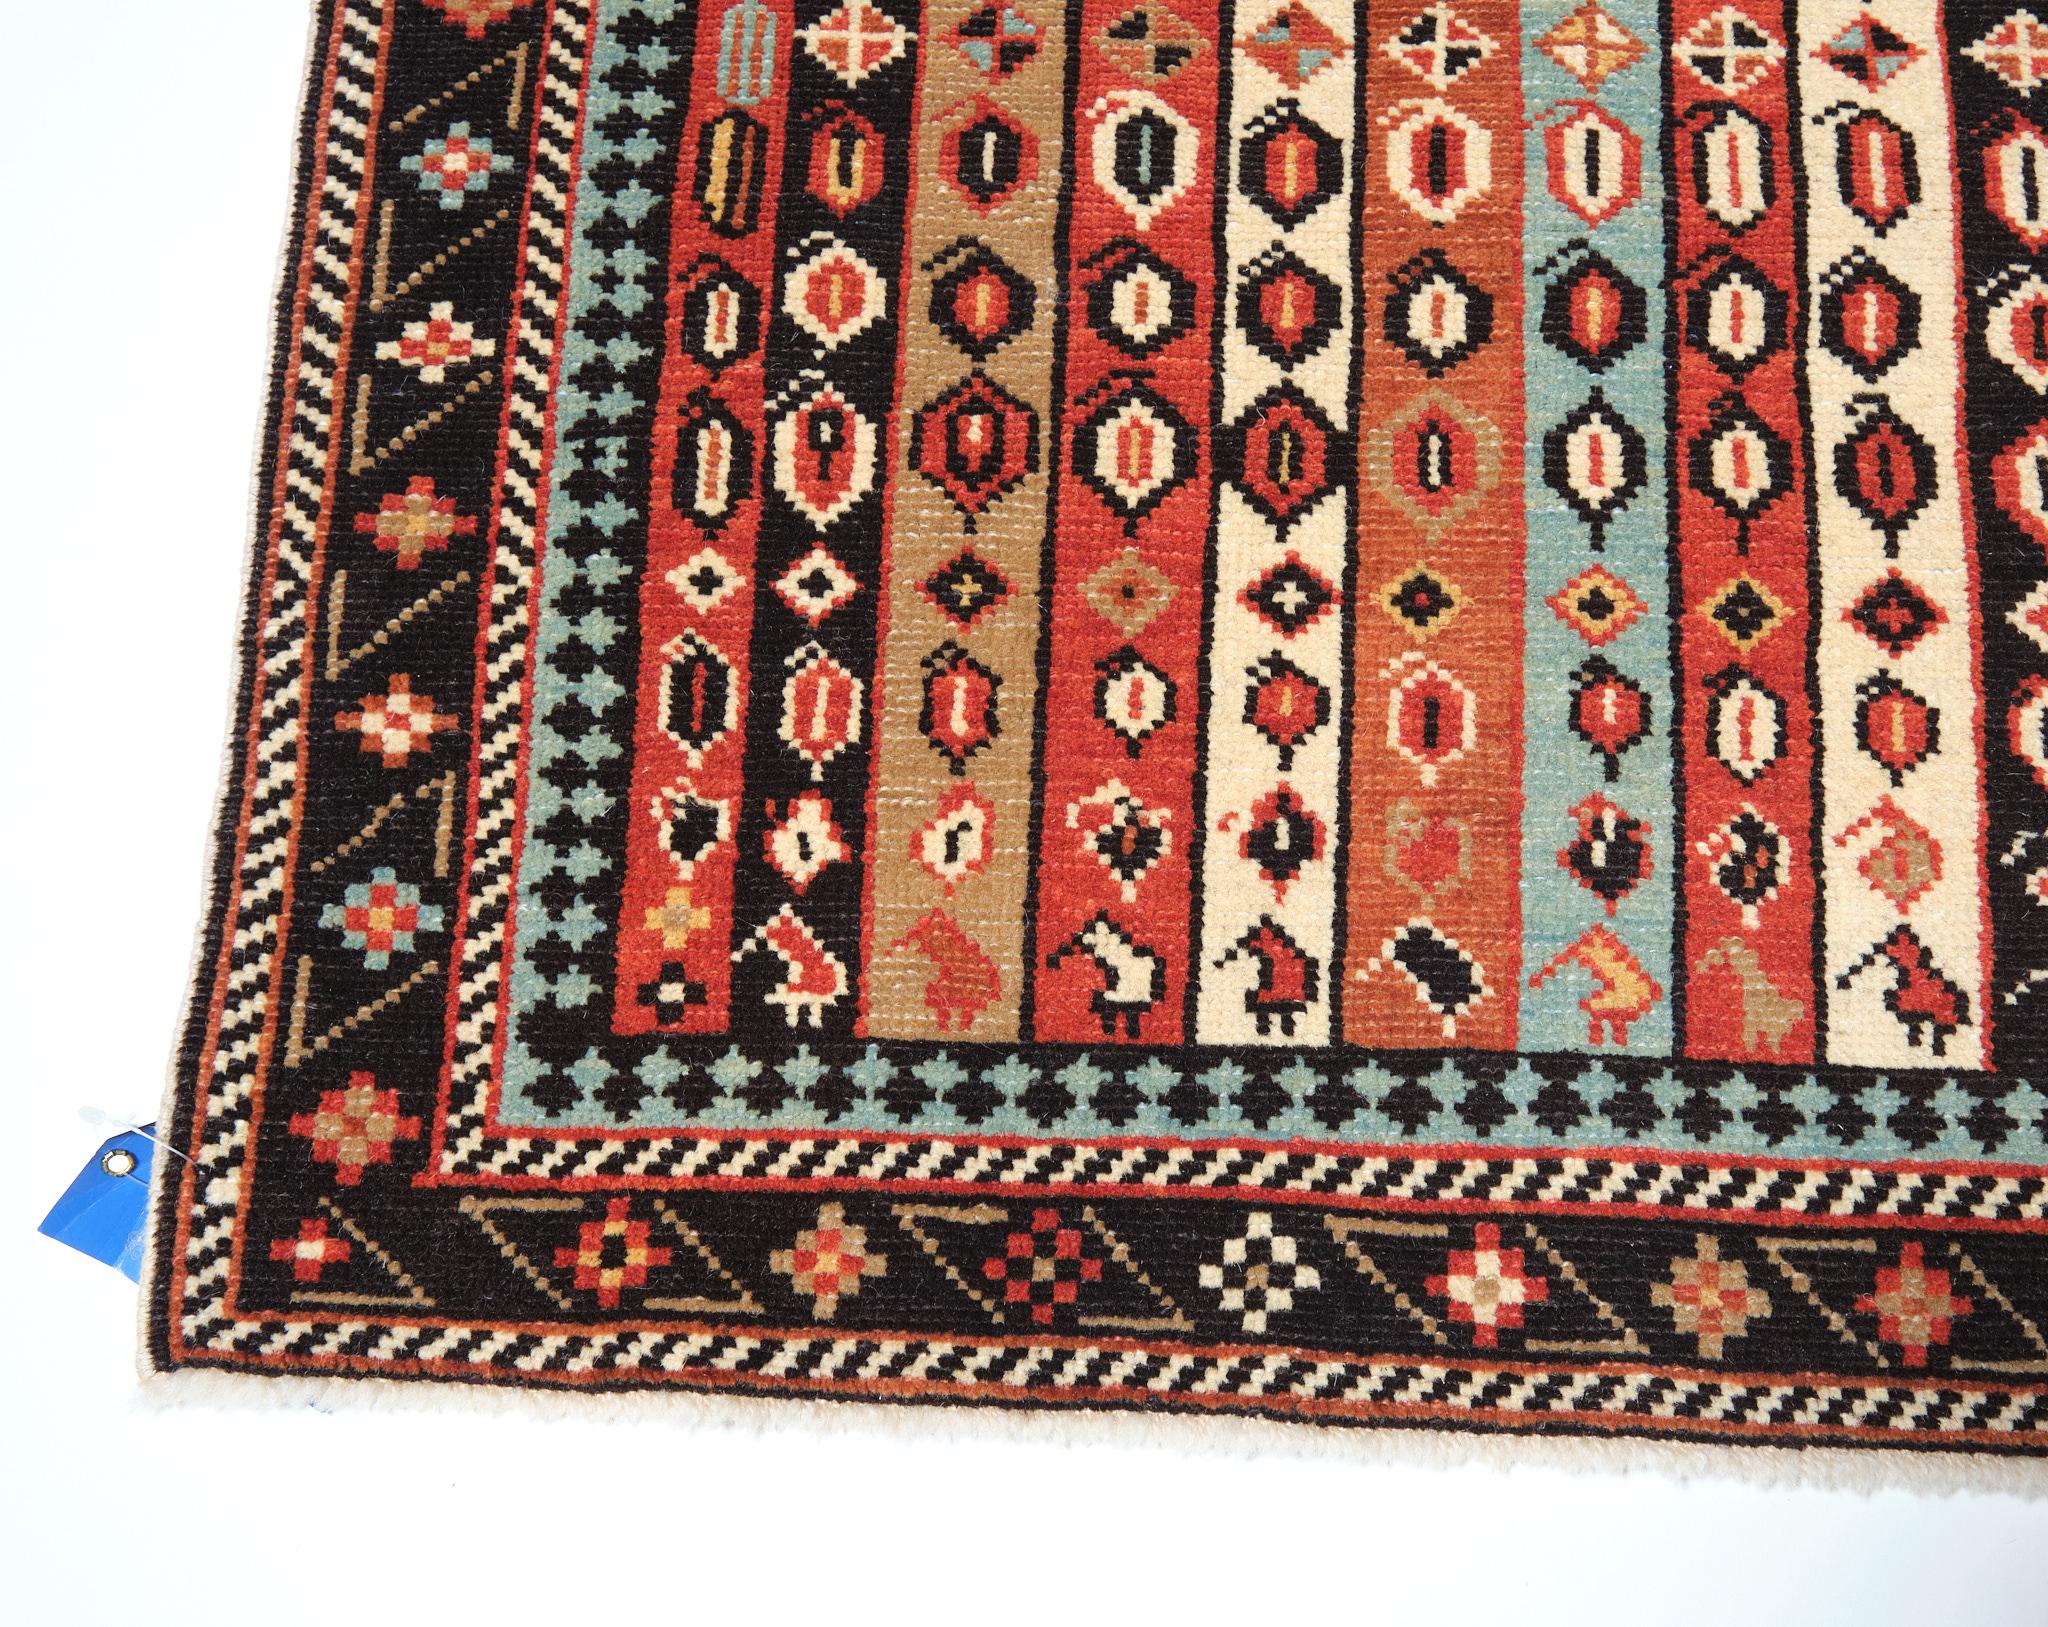 The source of the rug comes from the book Oriental Rugs Volume 1 Caucasian, Ian Bennett, Oriental Textile Press, Aberdeen 1993, nr.110. A related example dated 1280 A.H. (A.D. 1863) is illustrated by Peter Bausback in his Antike Orientteppiche, 1978